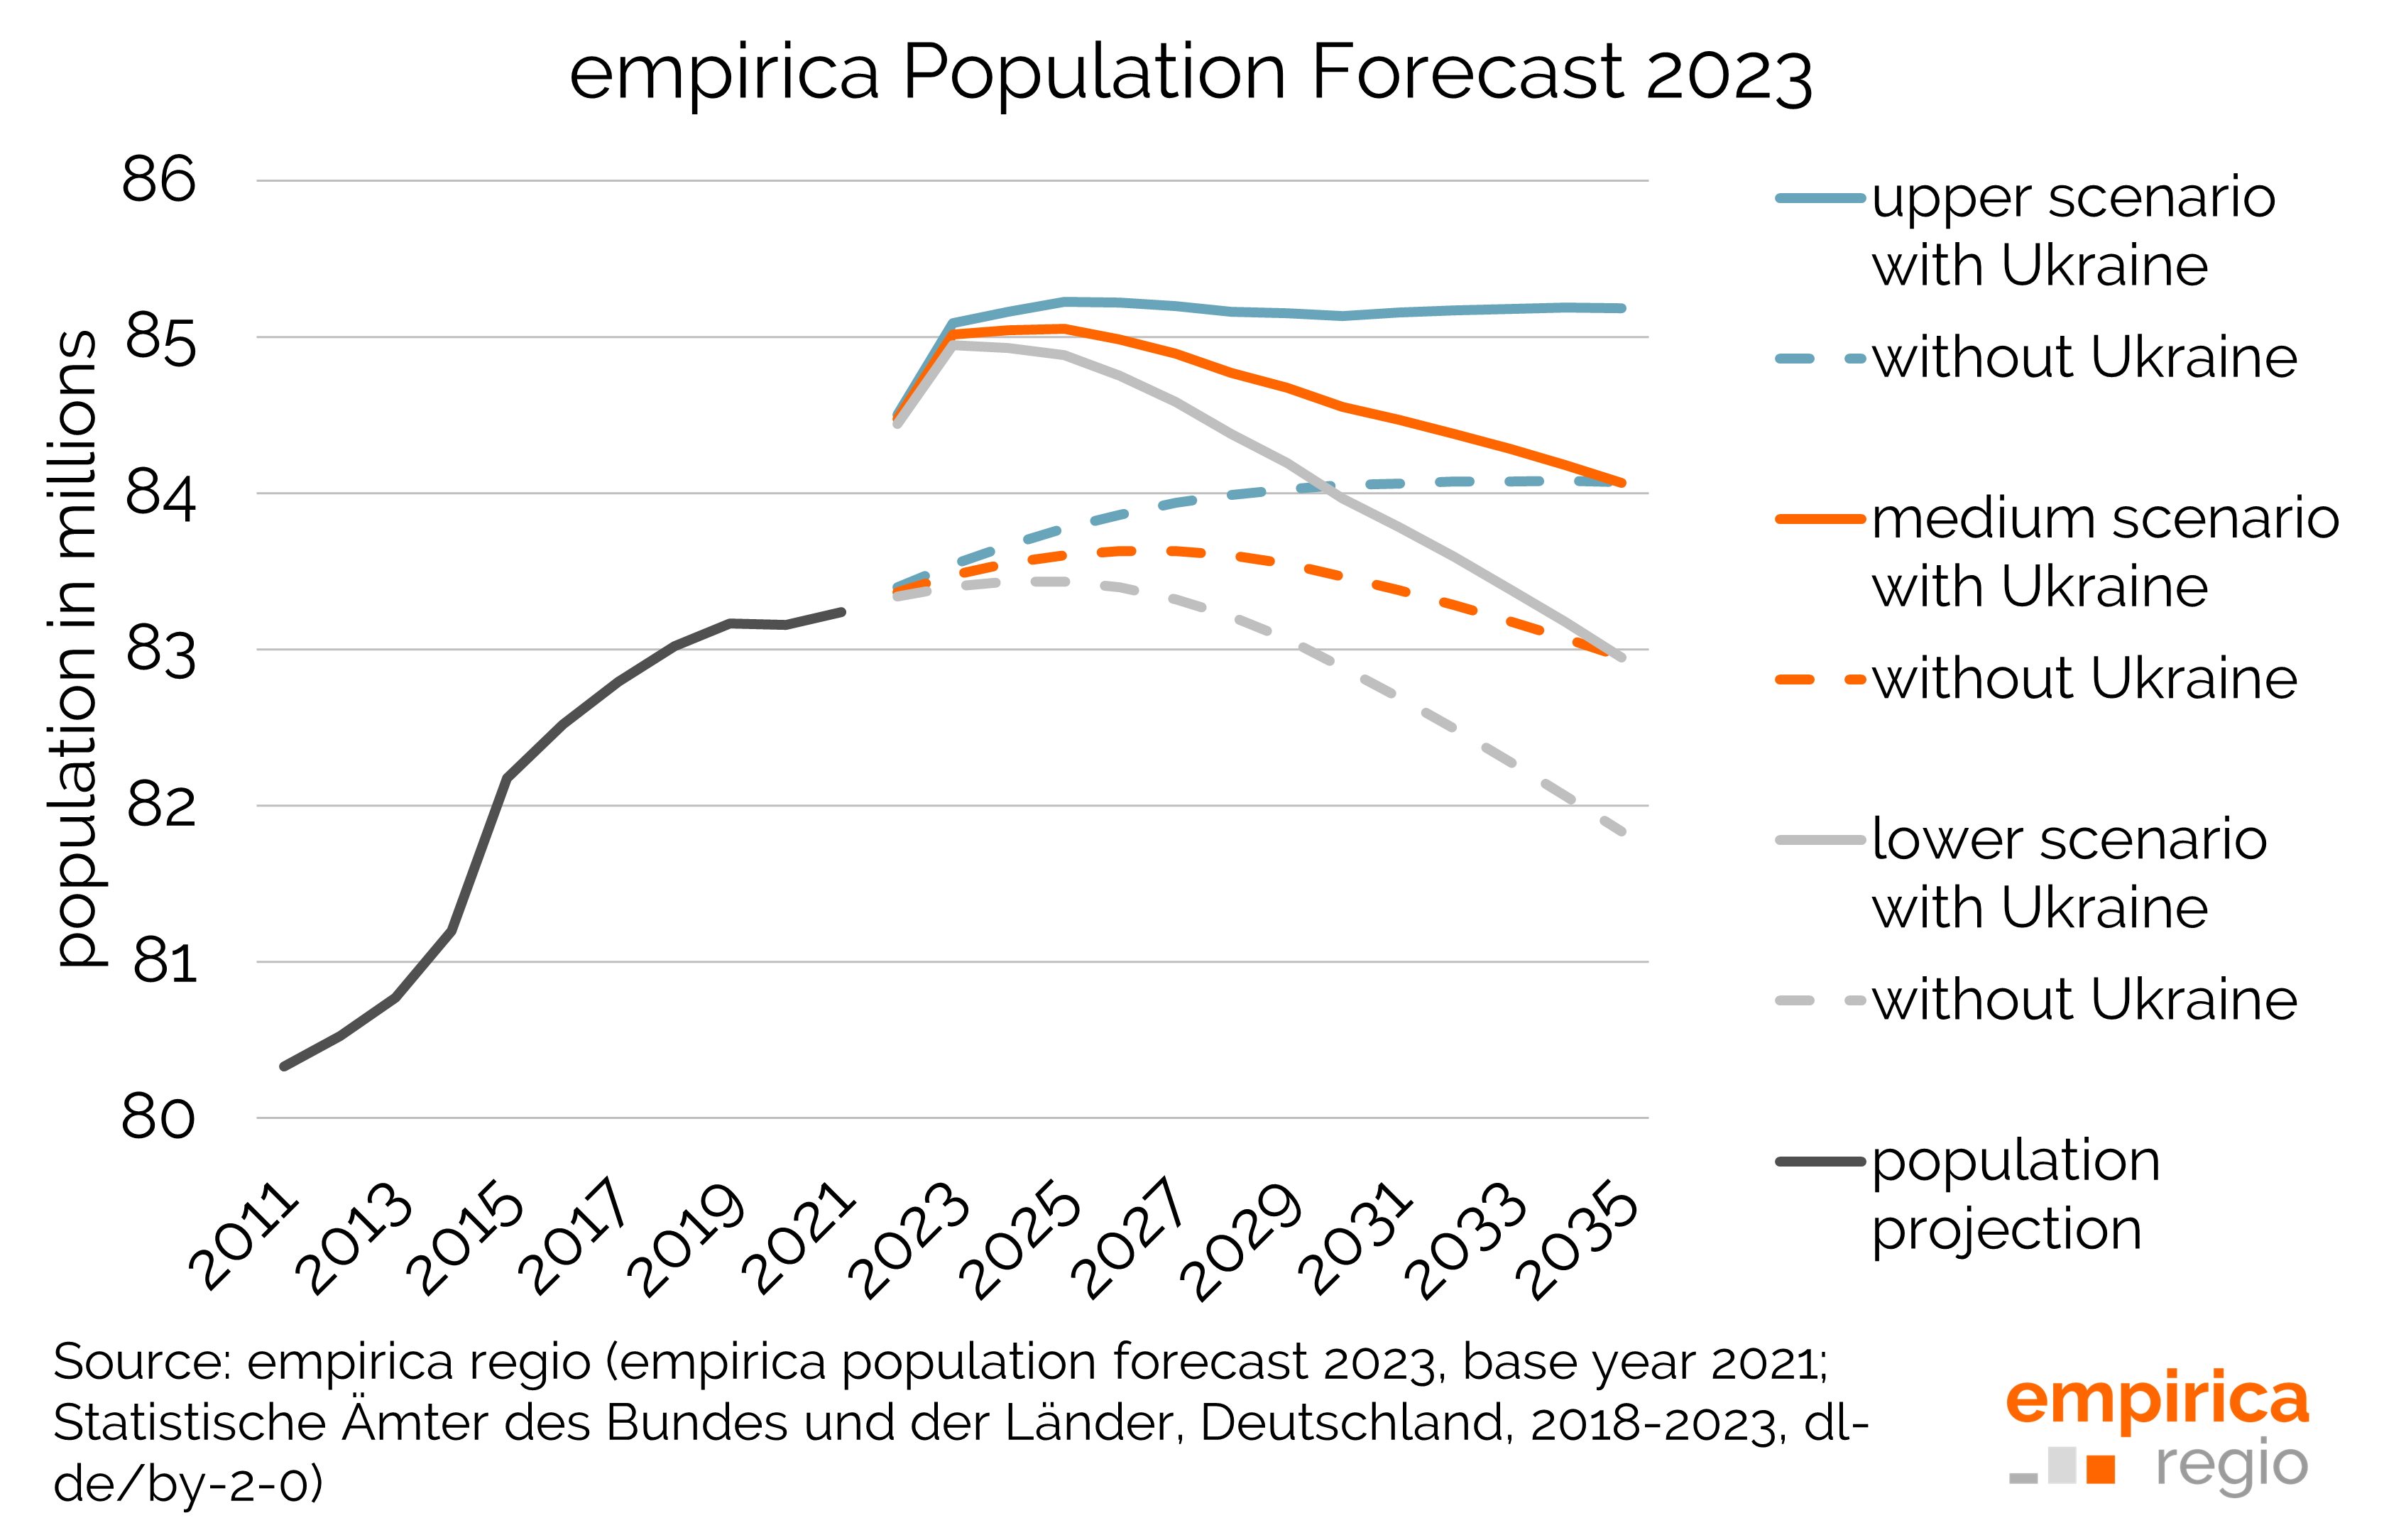 empirica Population Forecast 2023 - Three Scenarios with and without Ukraine in Comparison